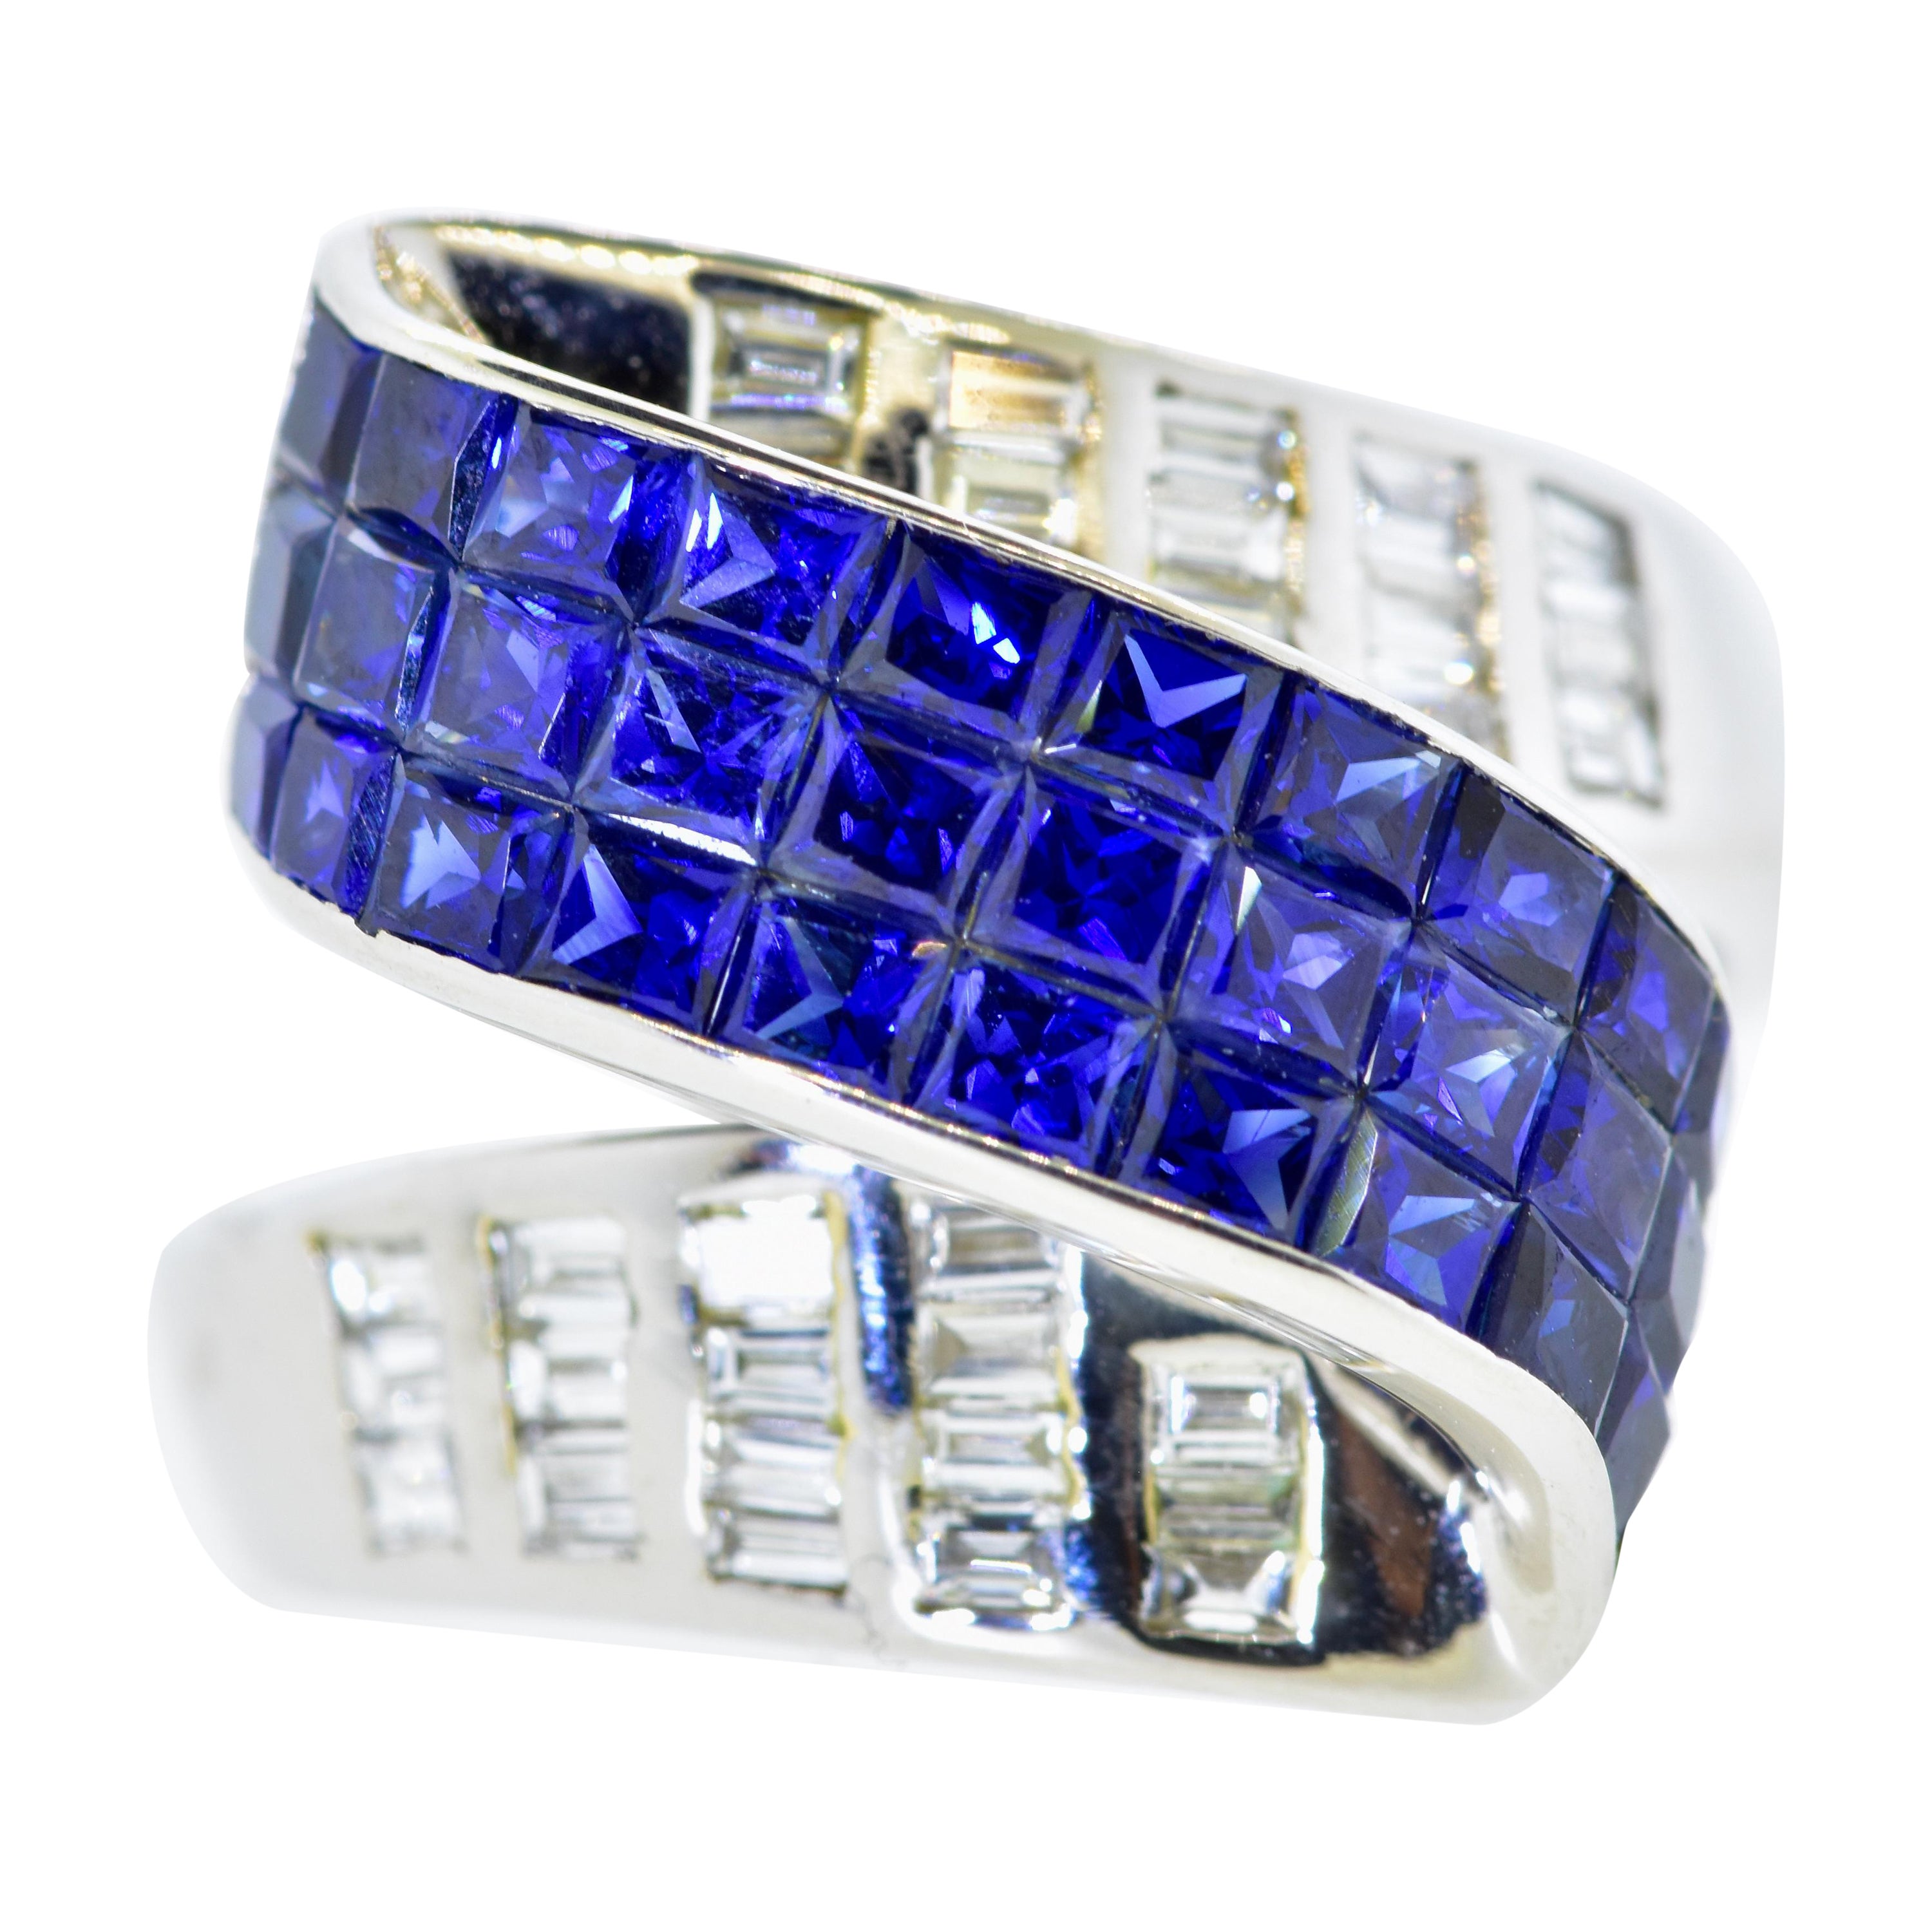 Diamond and Sapphire Contemporary ring.  In a scroll like motif, this unusual and finely made ring possesses invisibly set (one cannot set the metal between the sapphires)  natural vivid royal blue sapphires   The weight of these sapphires is